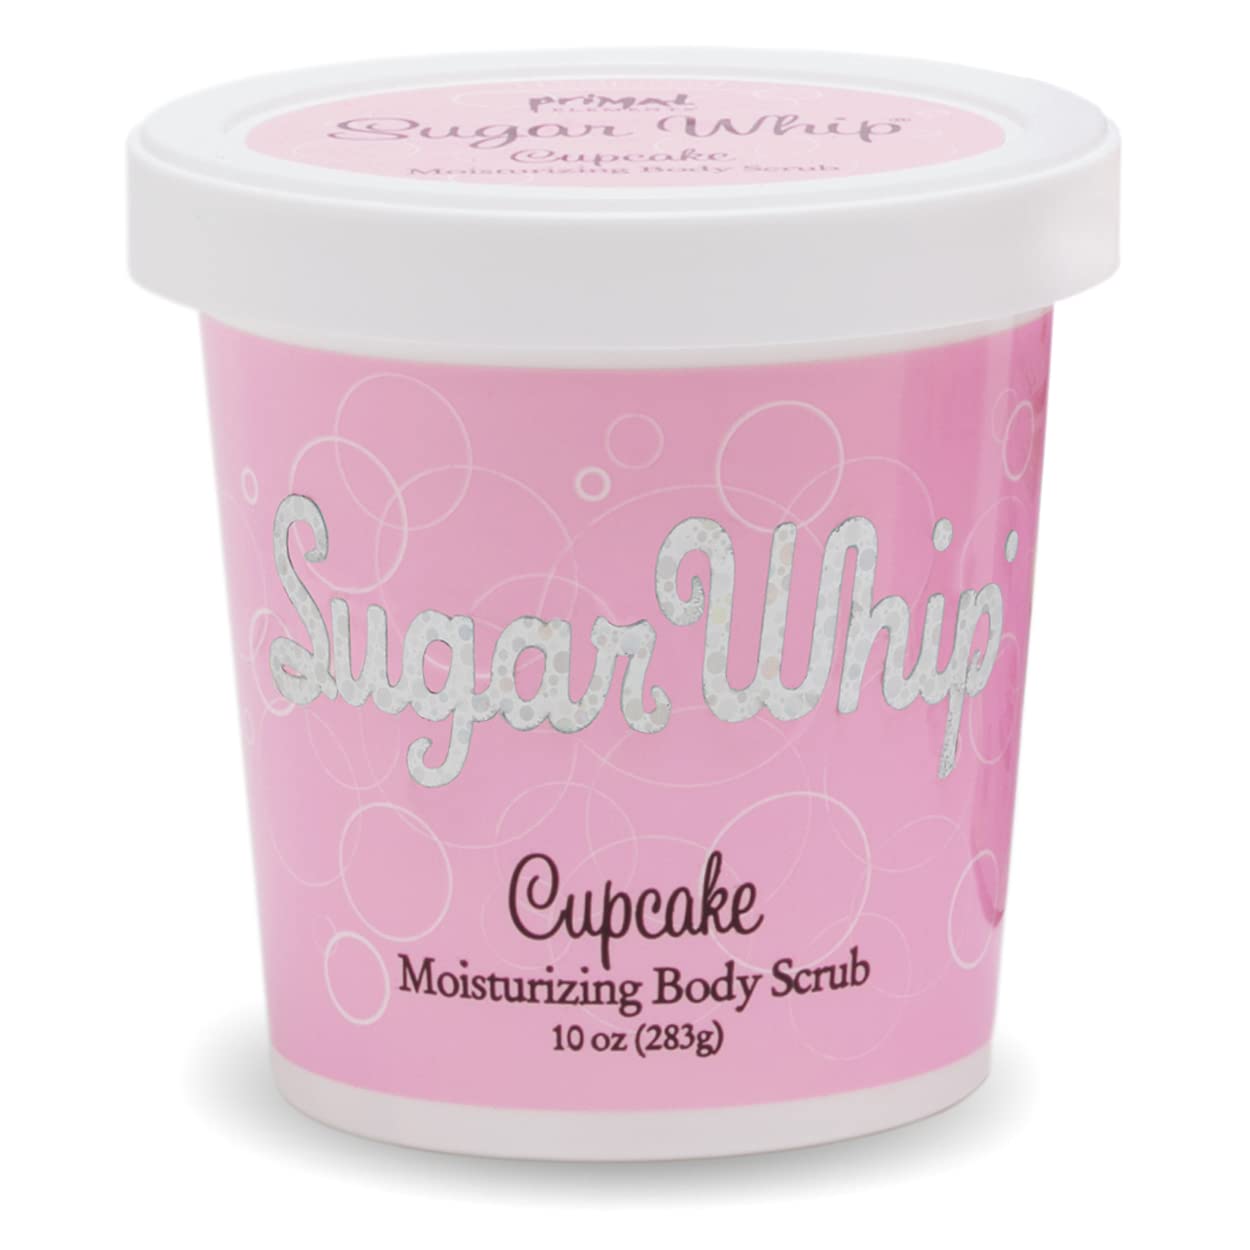 Primal Elements Sugar Whip Exfoliating Scrub, Body and Face Cleanser for Silky Smooth, Moisturize All Skin Types, 10 Oz, Cupcake, 10 Ounce